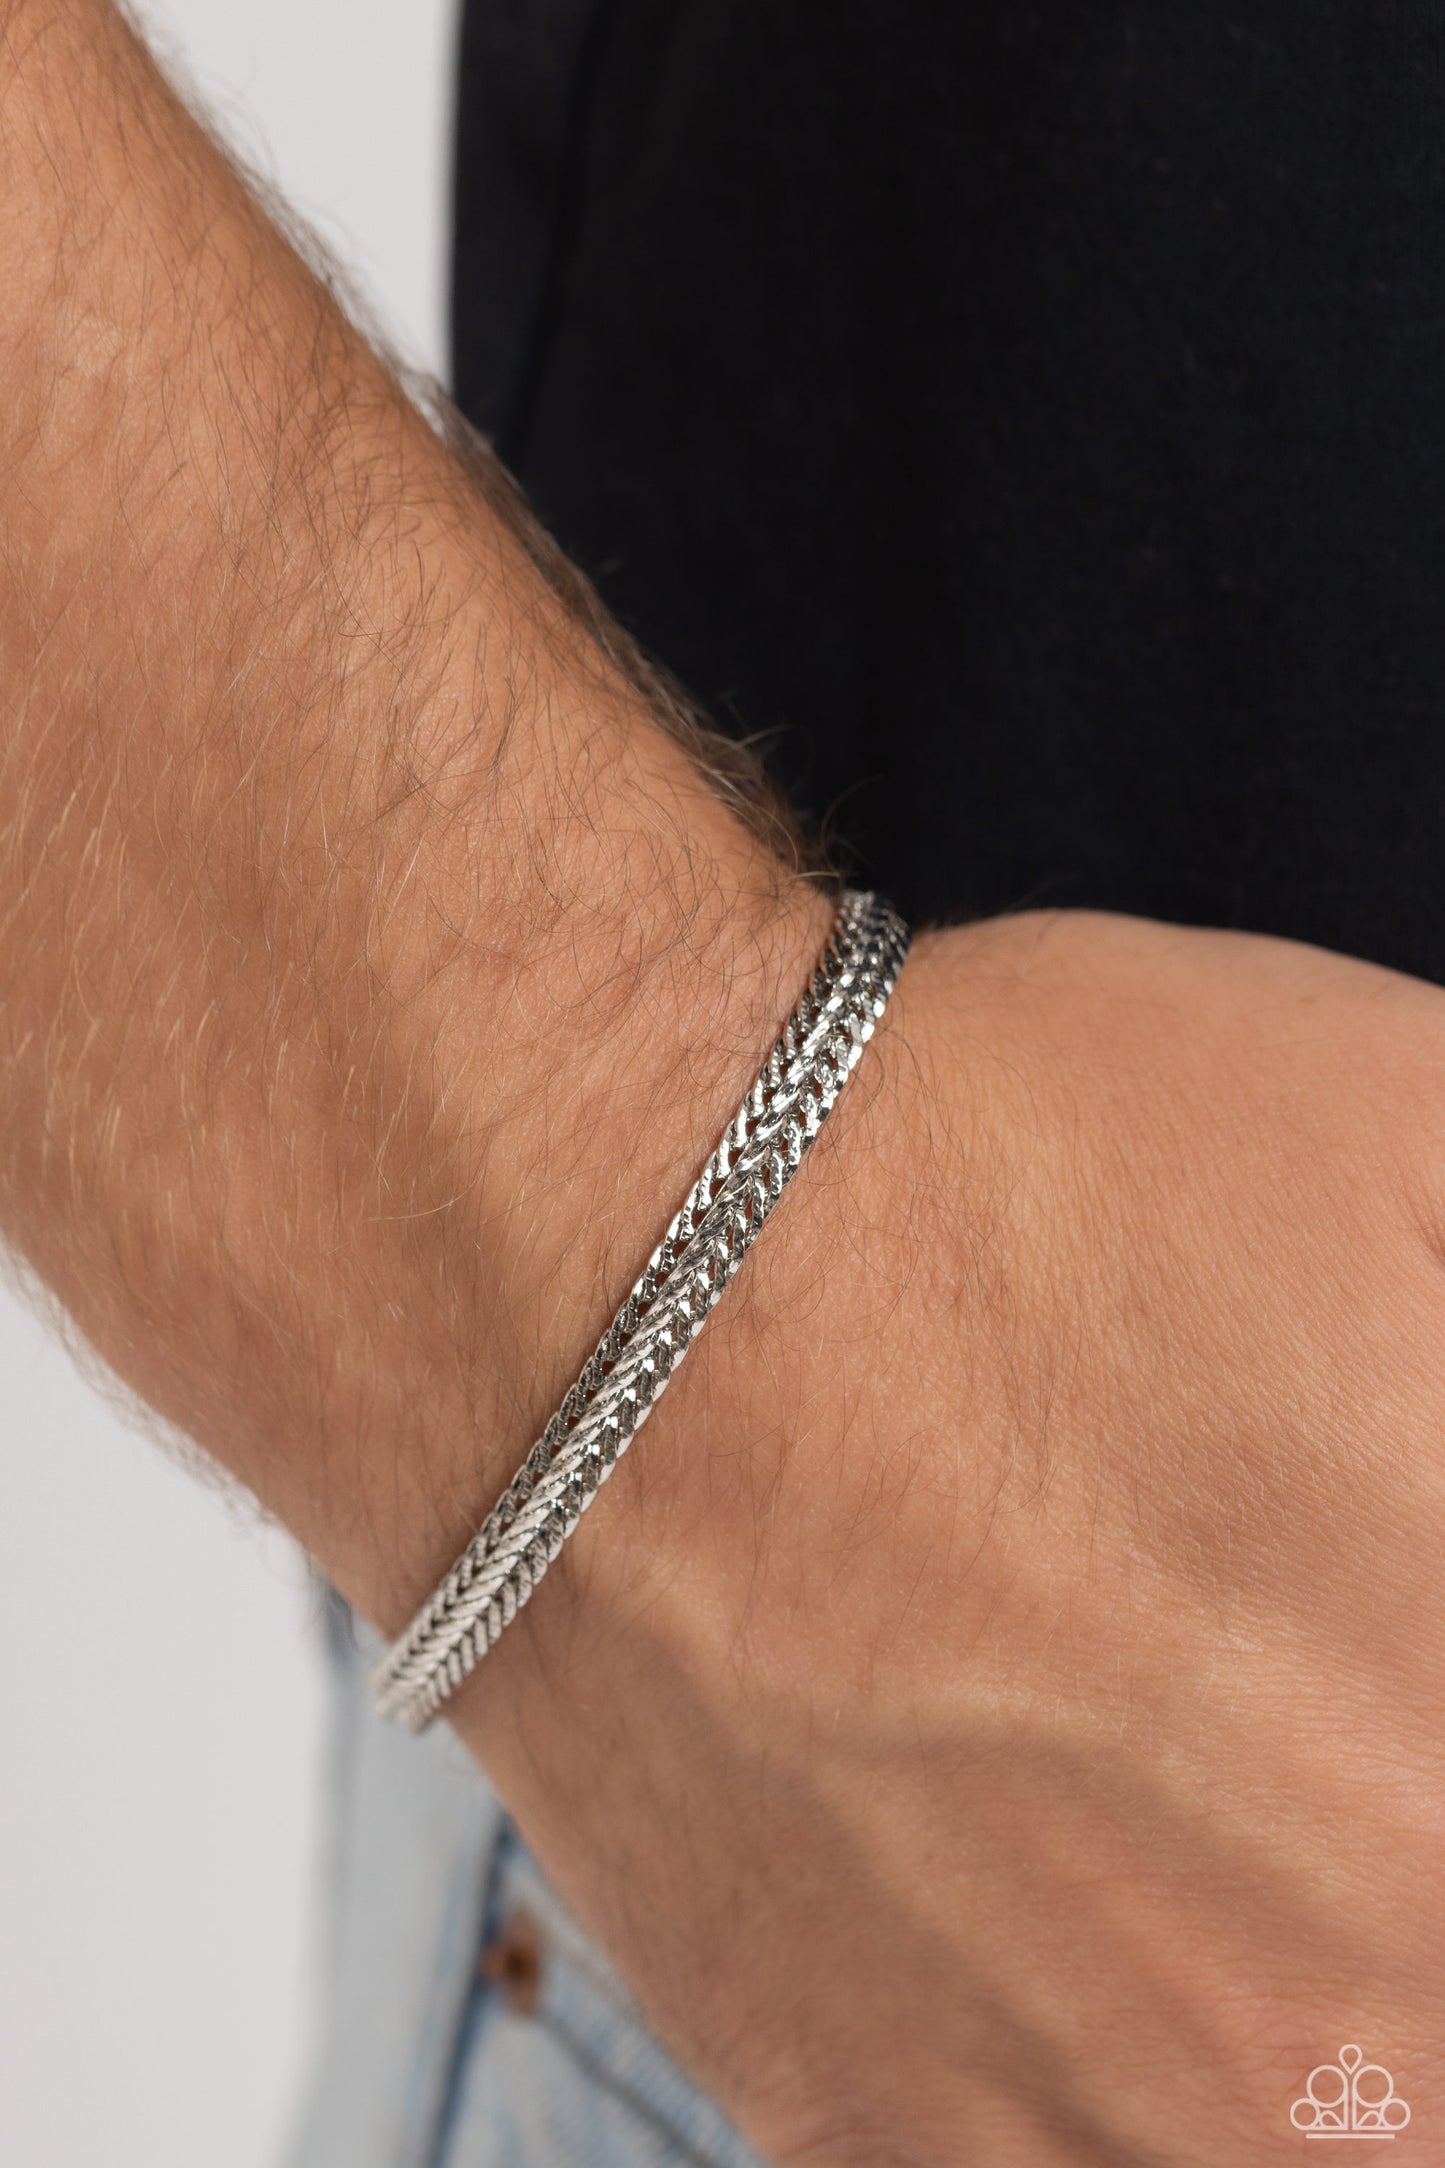 Cable Train - Silver Intricate Bracelet Magnetic Closure